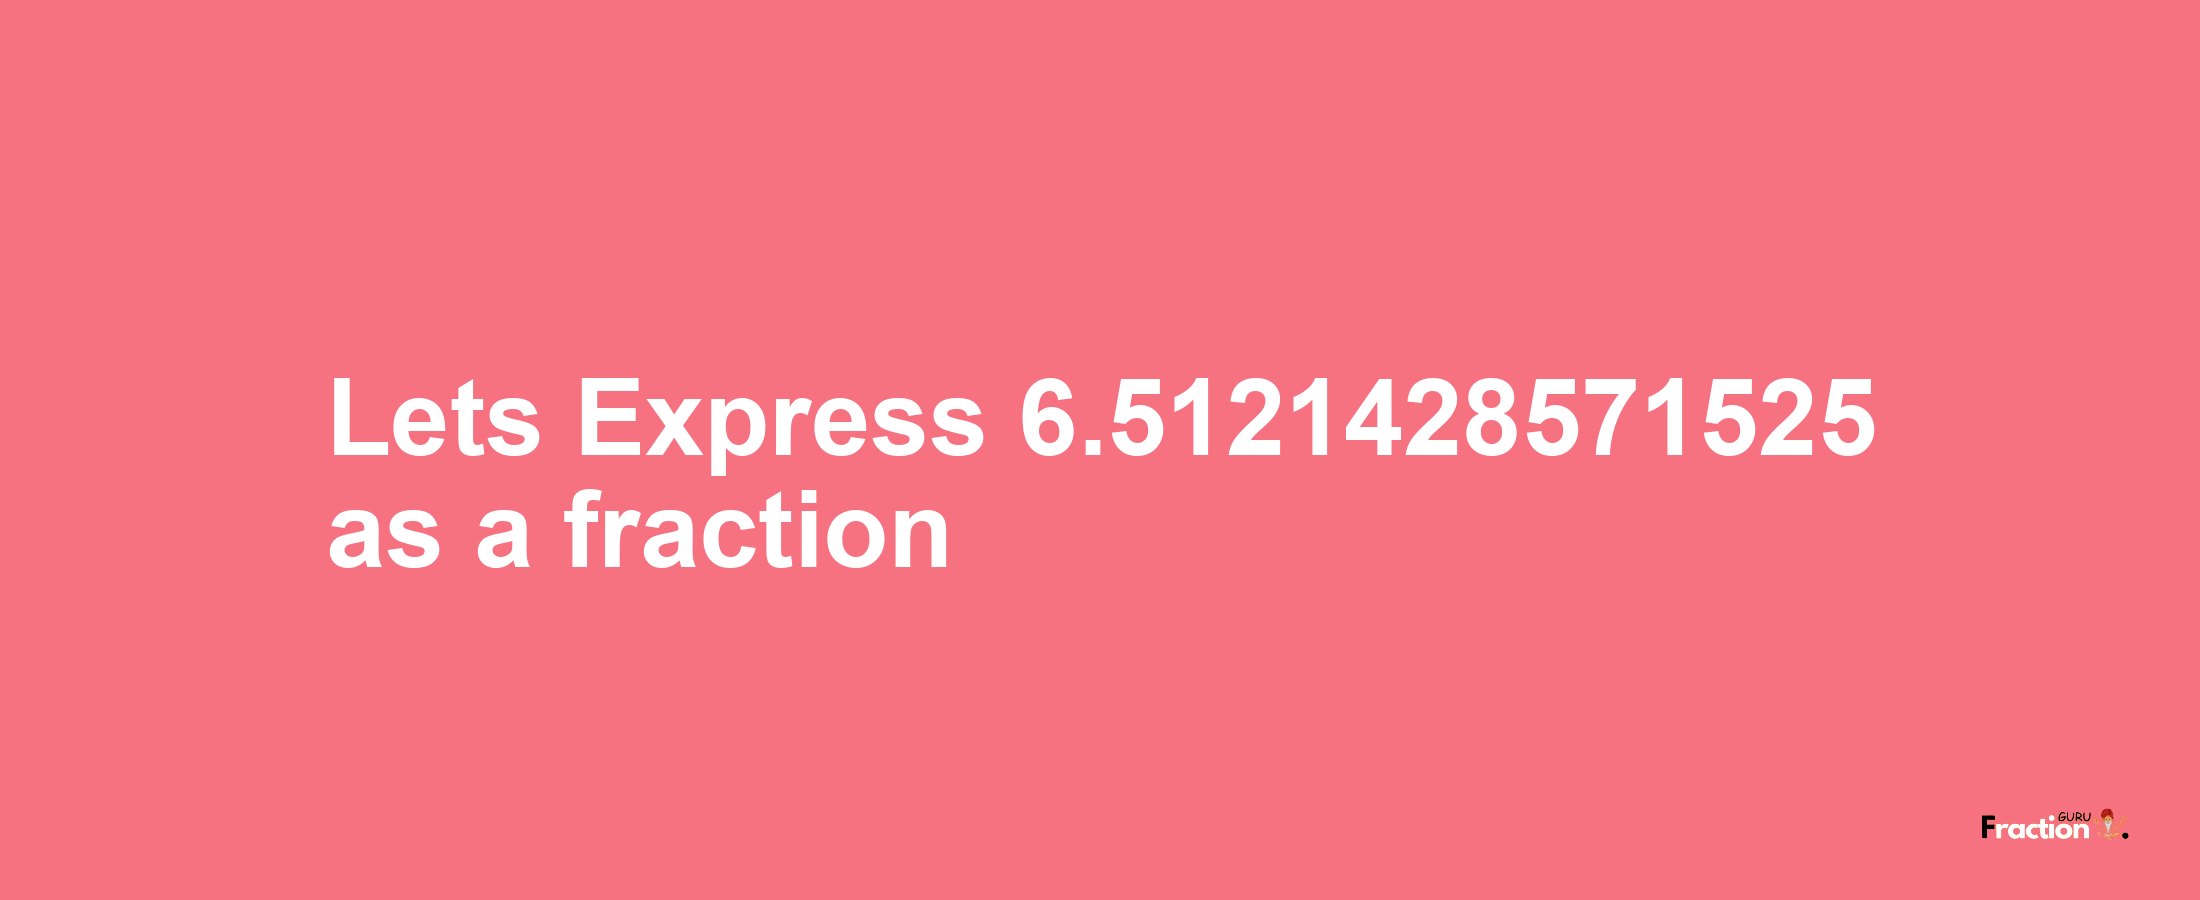 Lets Express 6.5121428571525 as afraction